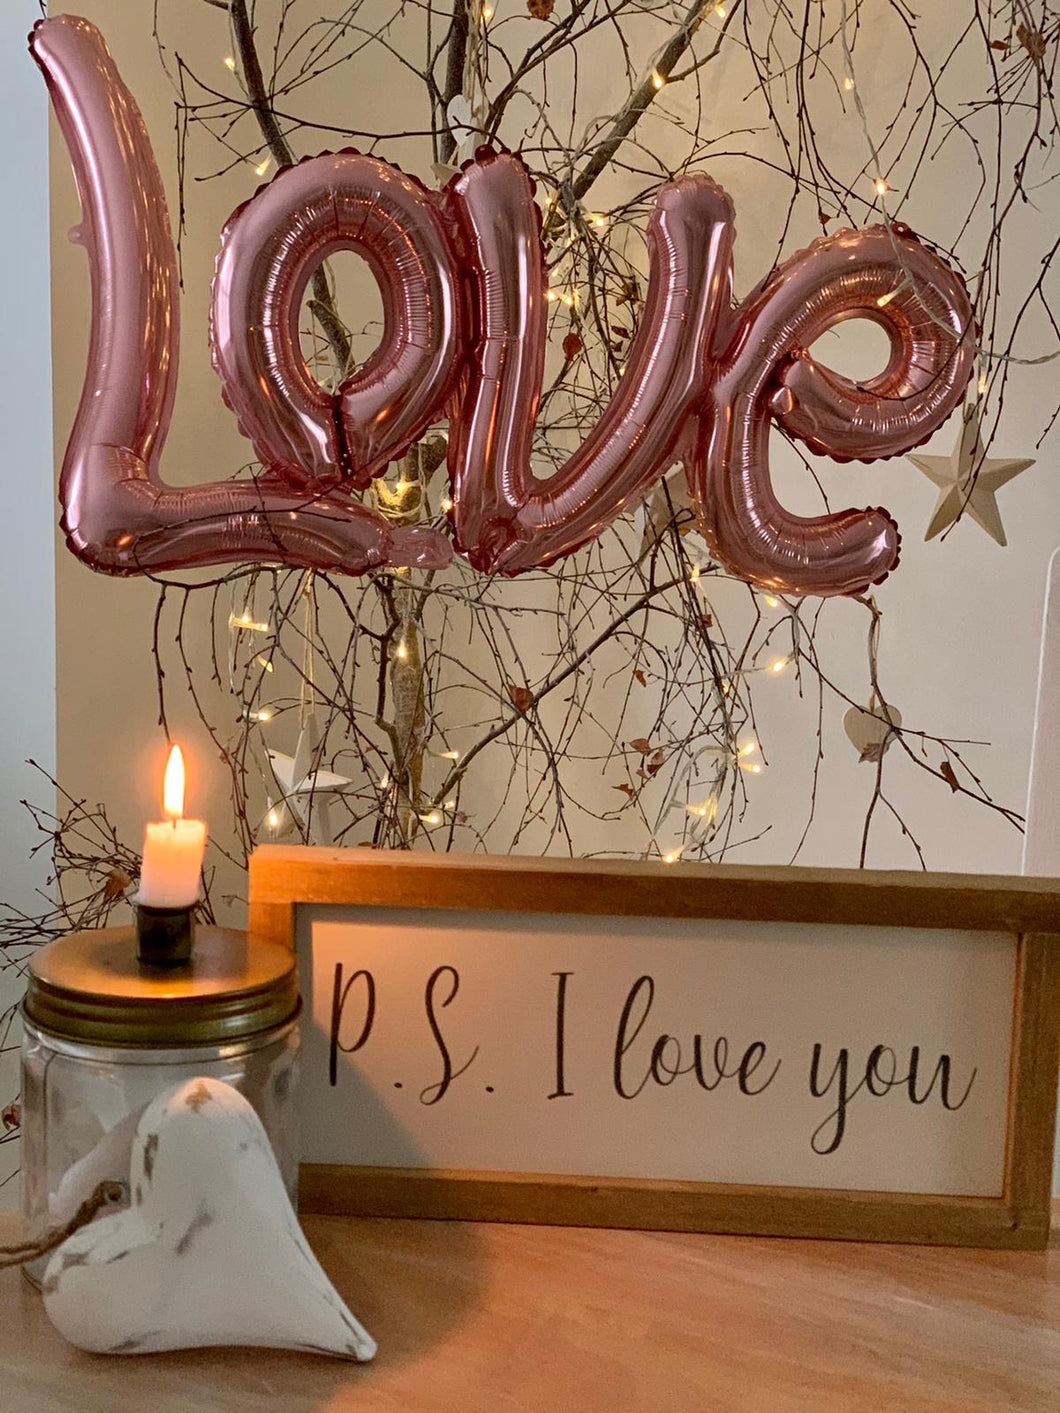 PS I love you Rustic Sign